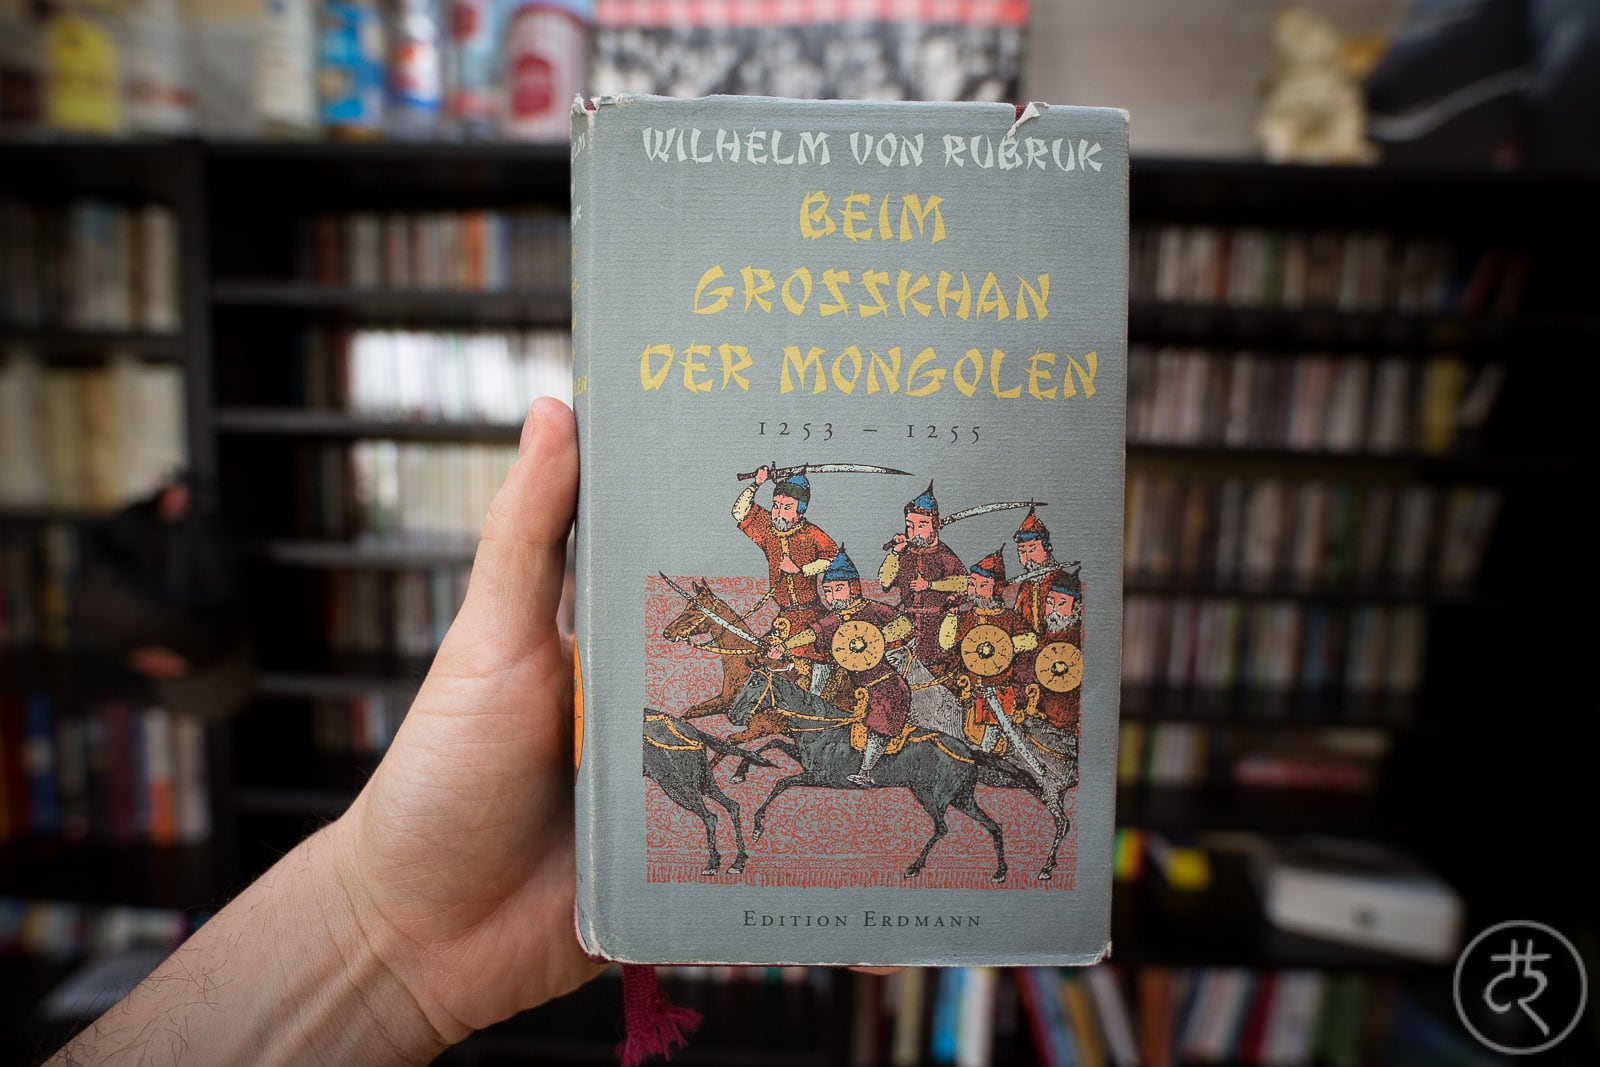 Guillaume de Rubrouck's "Account of the Mongols"